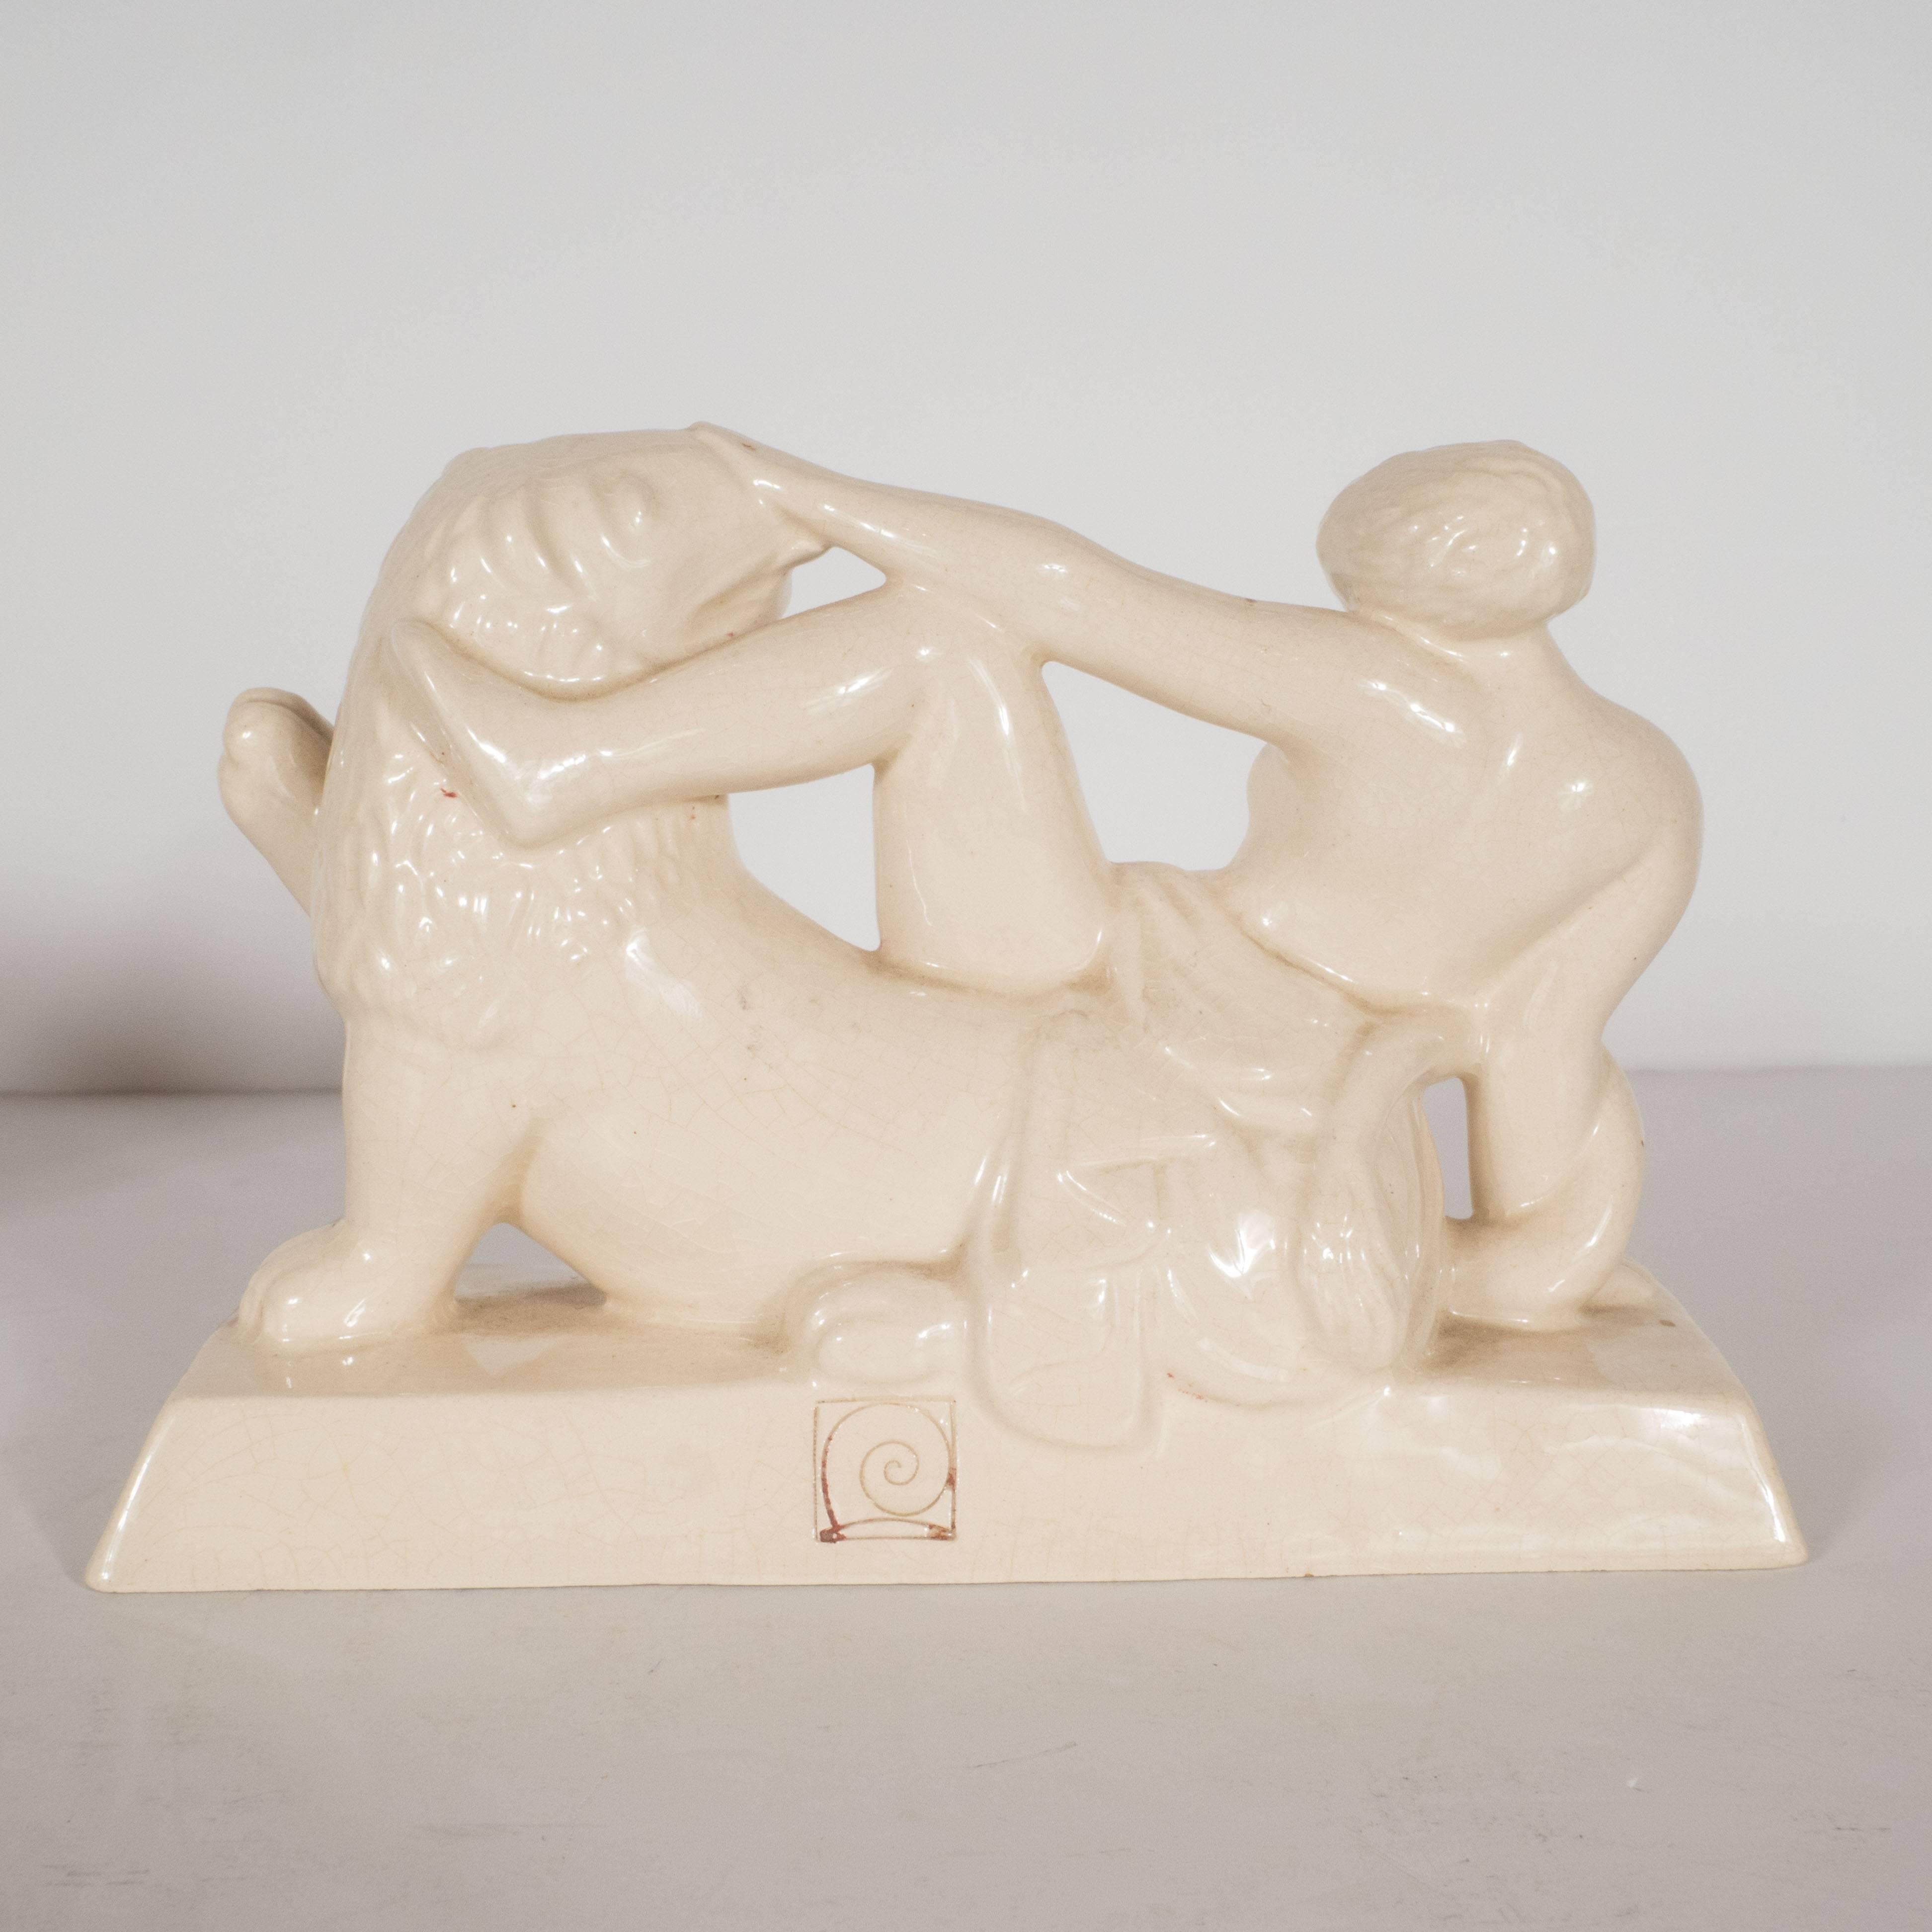 Art Deco Ceramic Book Ends Featuring Lion and Nude Female Figure In Excellent Condition For Sale In New York, NY